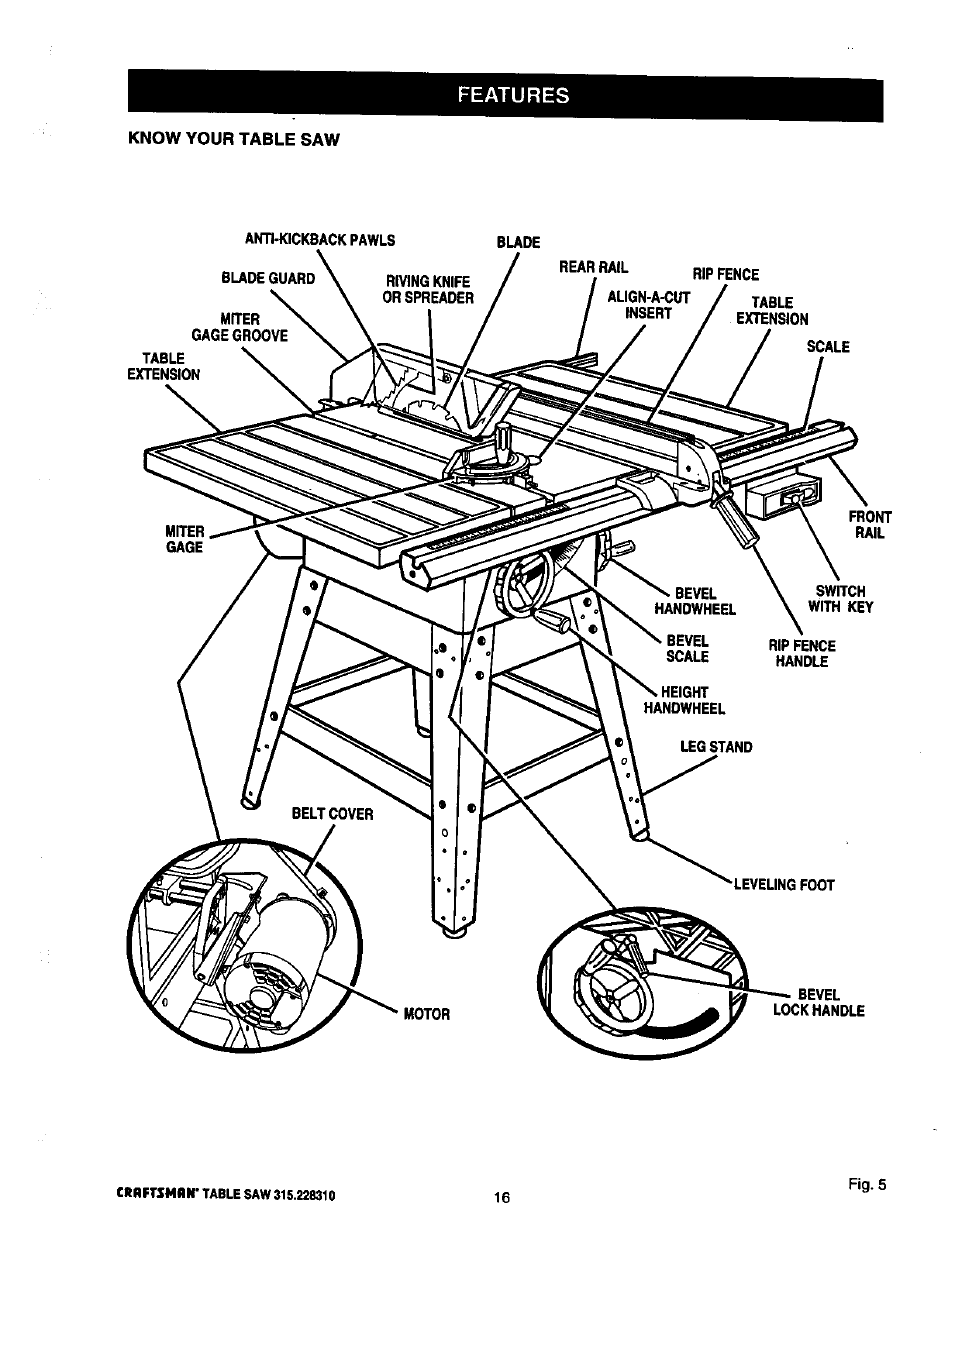 Features | Craftsman 315.228310 User Manual | Page 16 / 64